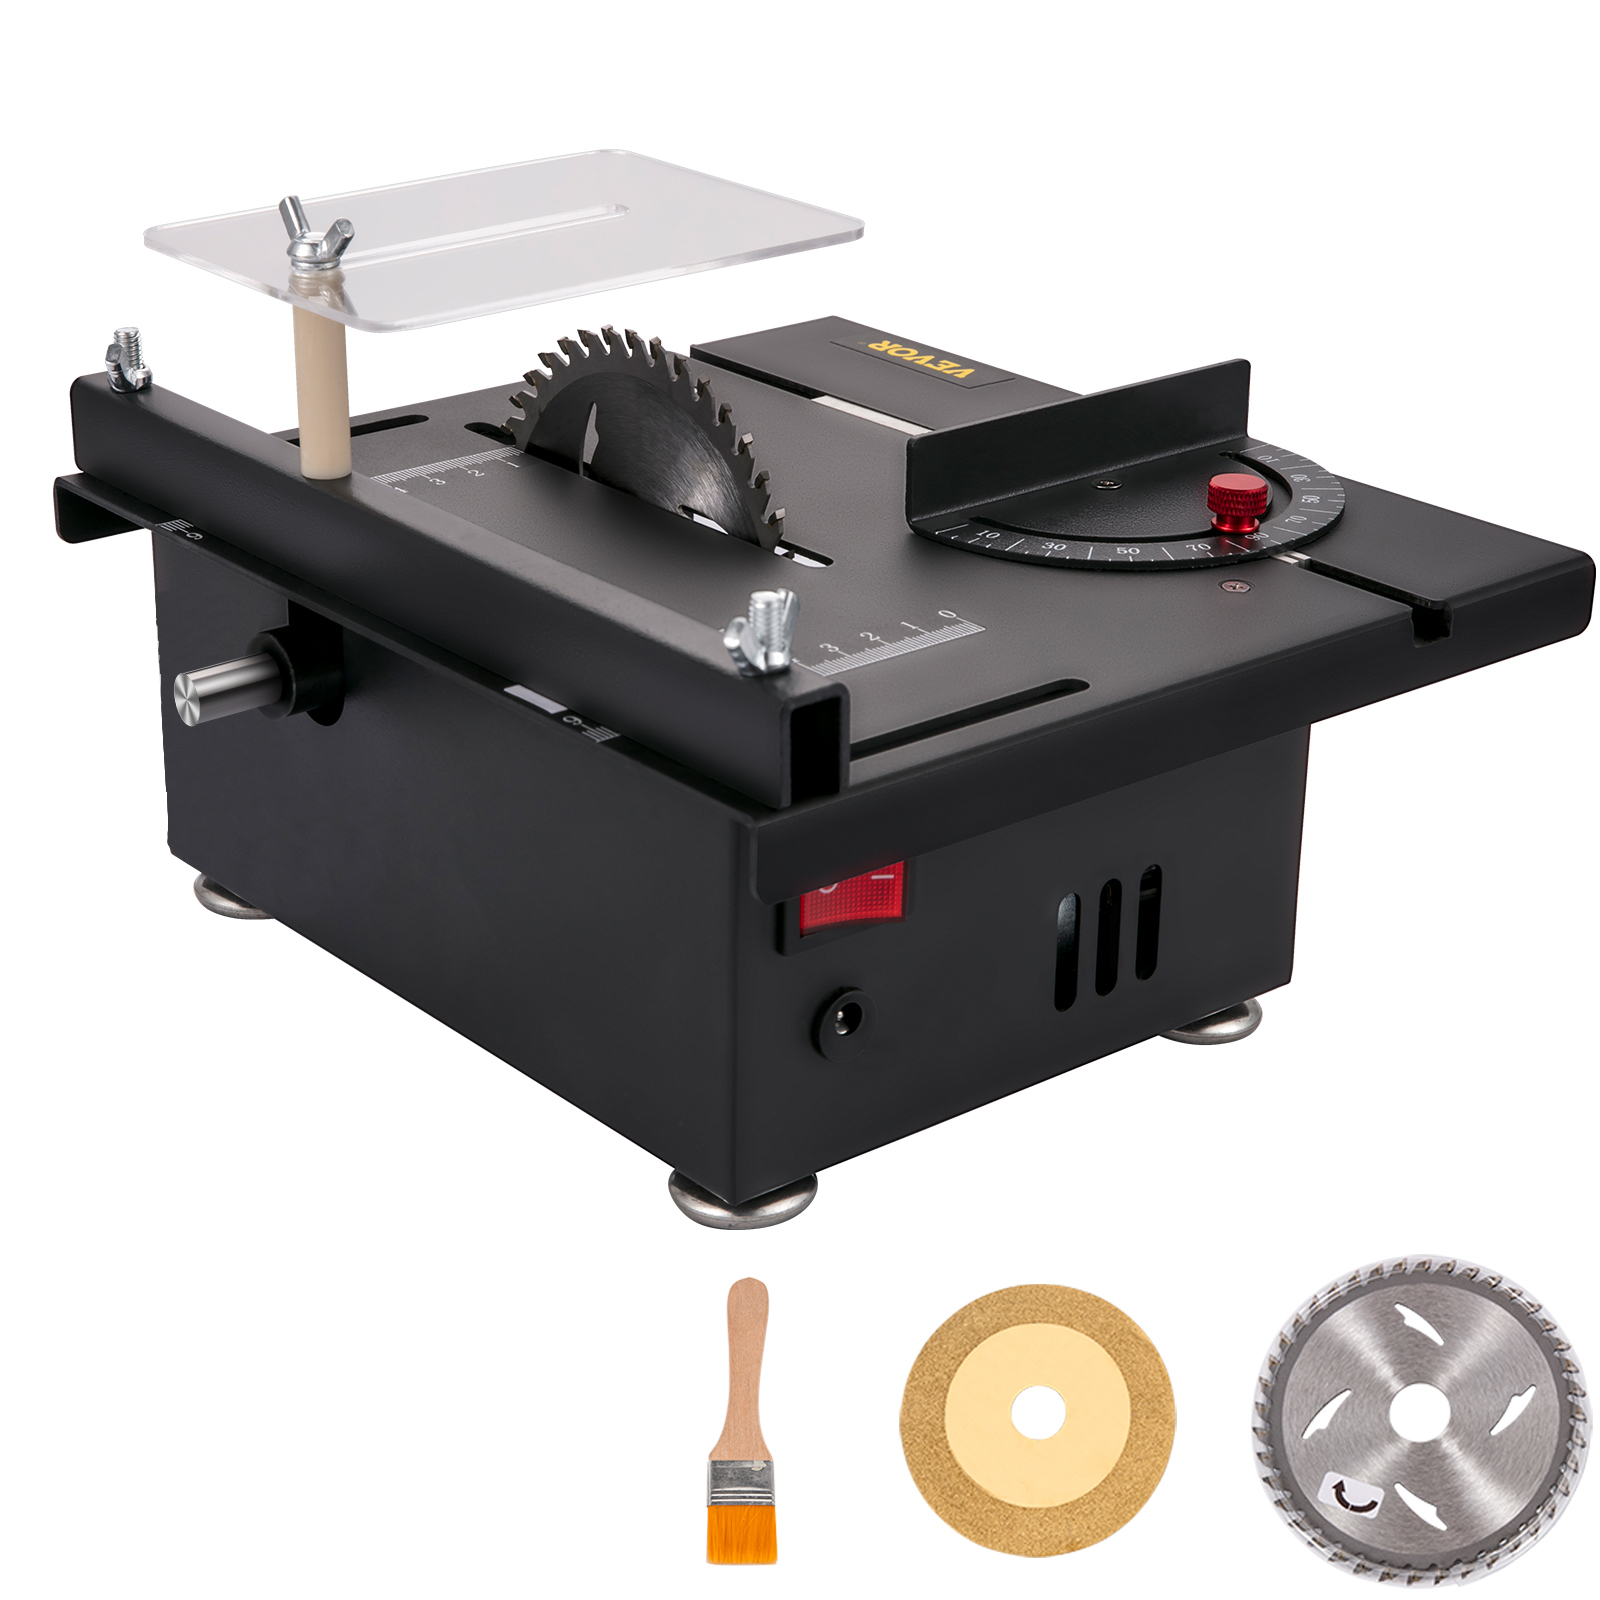 VEVOR VEVOR Mini Table Saw, 96W Hobby Table Saw for Woodworking, 0-90 Angle  Cutting Portable DIY Saw, 7-Level Speed Adjustable Multifunctional Table  Saws, 1.57in Cutting Depth Mini Precision Table Saw VEVOR EU